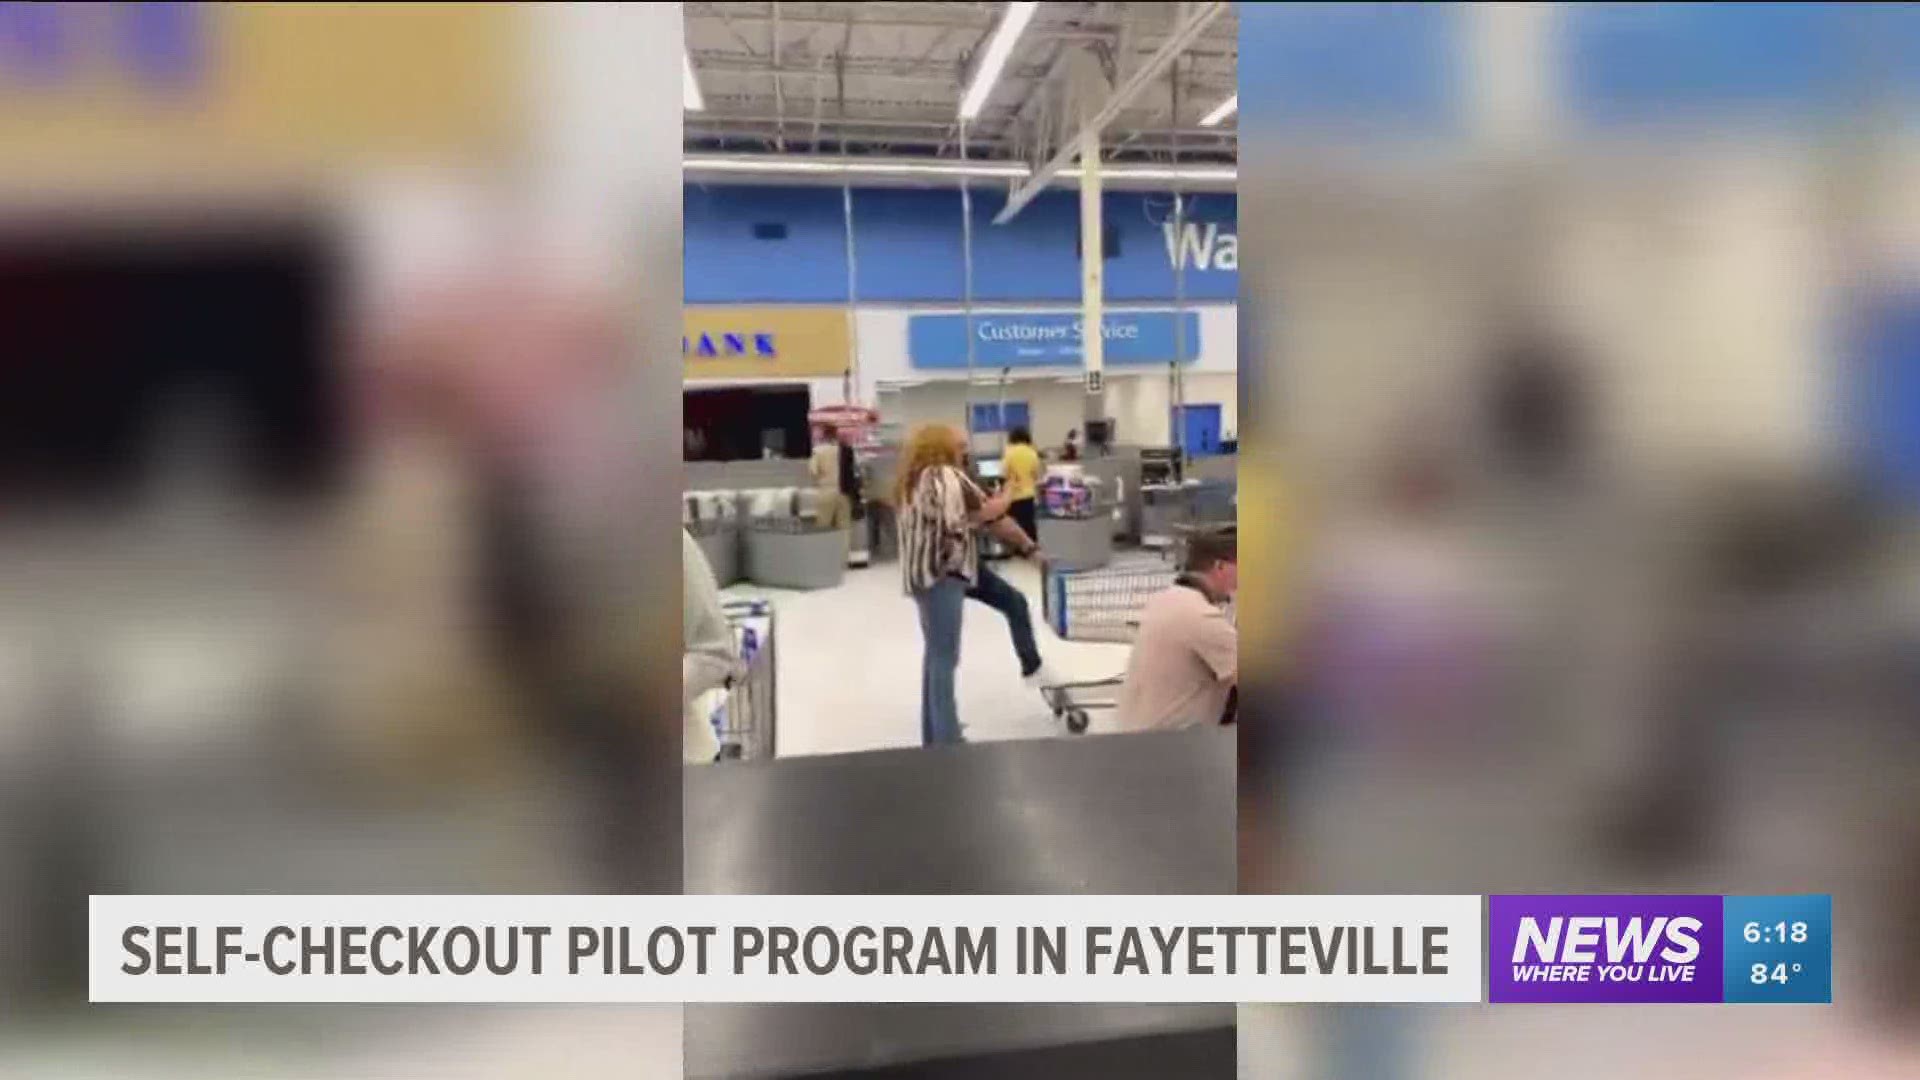 The store on Joyce Boulevard in Fayetteville is being used as a test site to launch all self-checkouts.